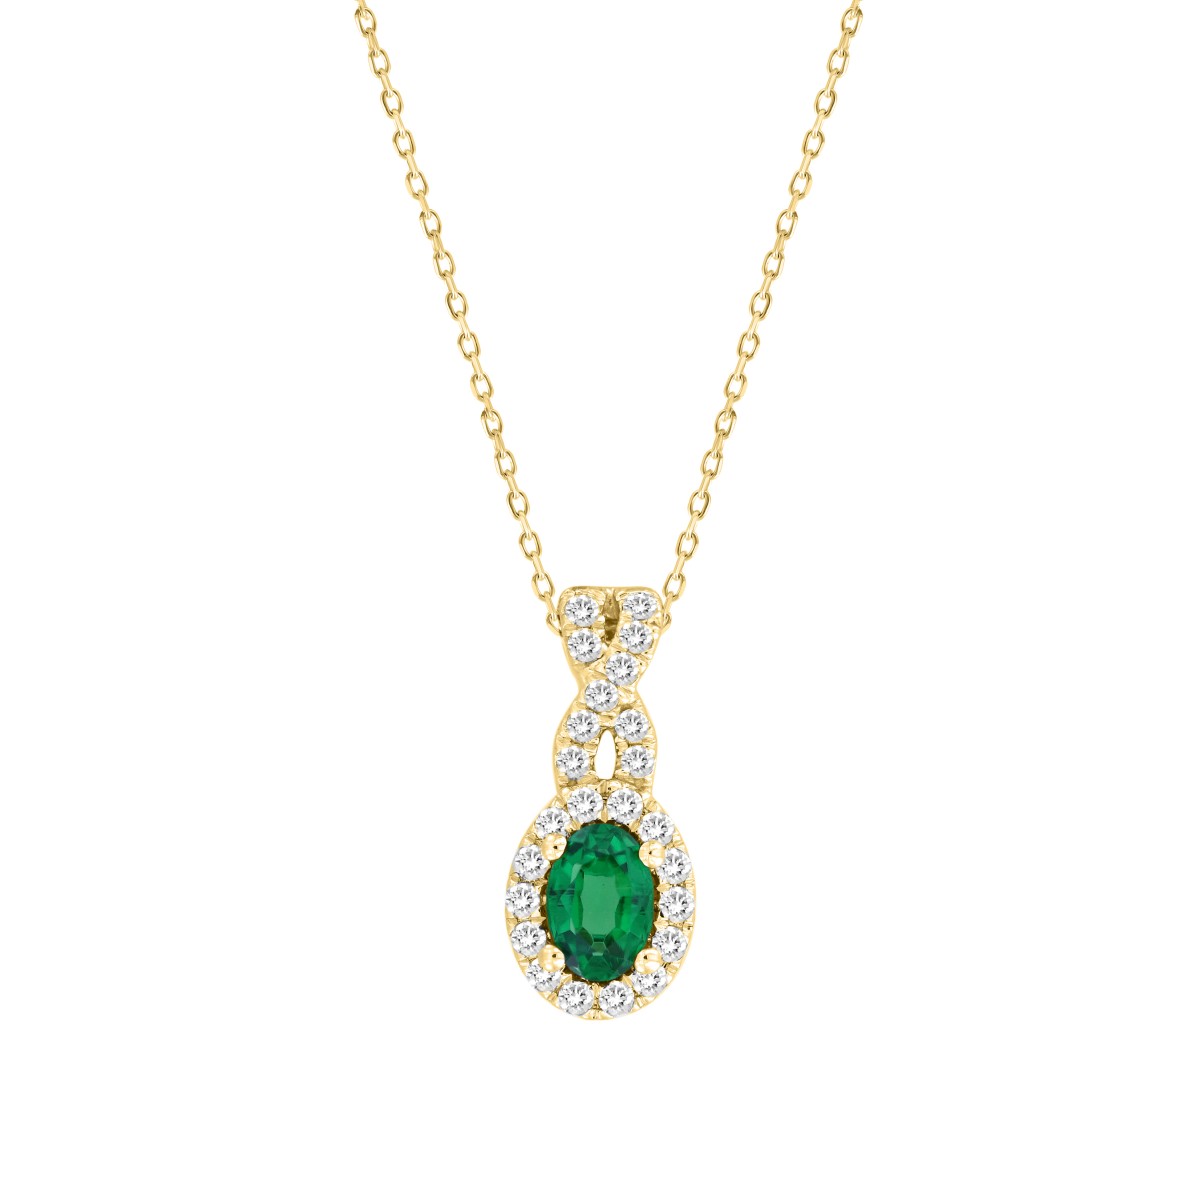 14K YELLOW GOLD 3/4CT ROUND/OVAL DIAMOND LADIES PENDANT WITH CHAIN(COLOR STONE OVAL GREEN EMERALD DIAMOND 1/2CT)